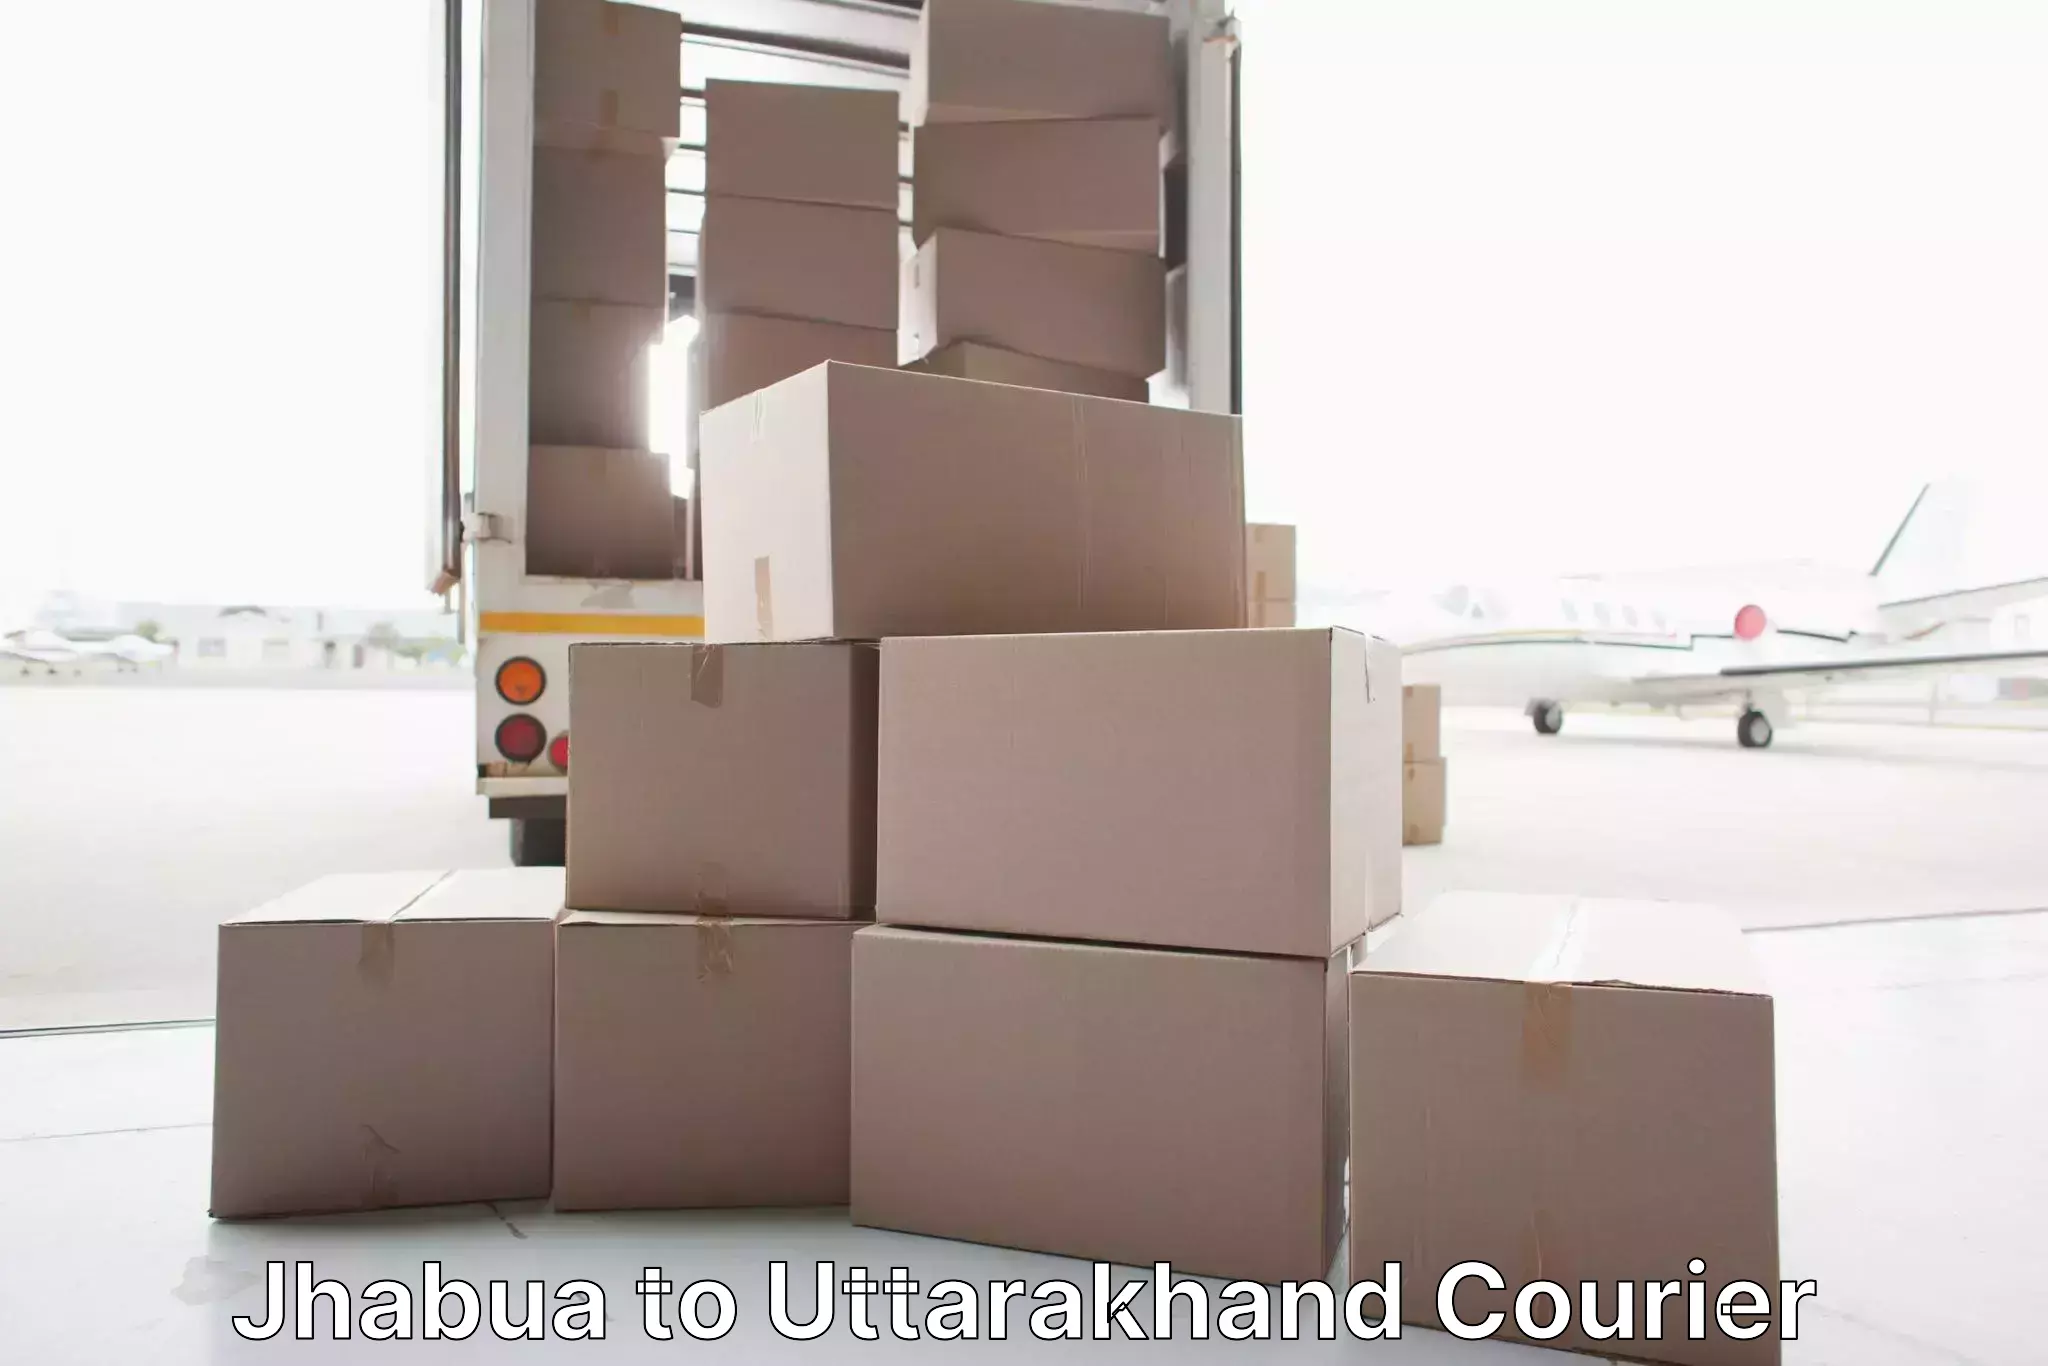 Quality relocation assistance in Jhabua to Rishikesh